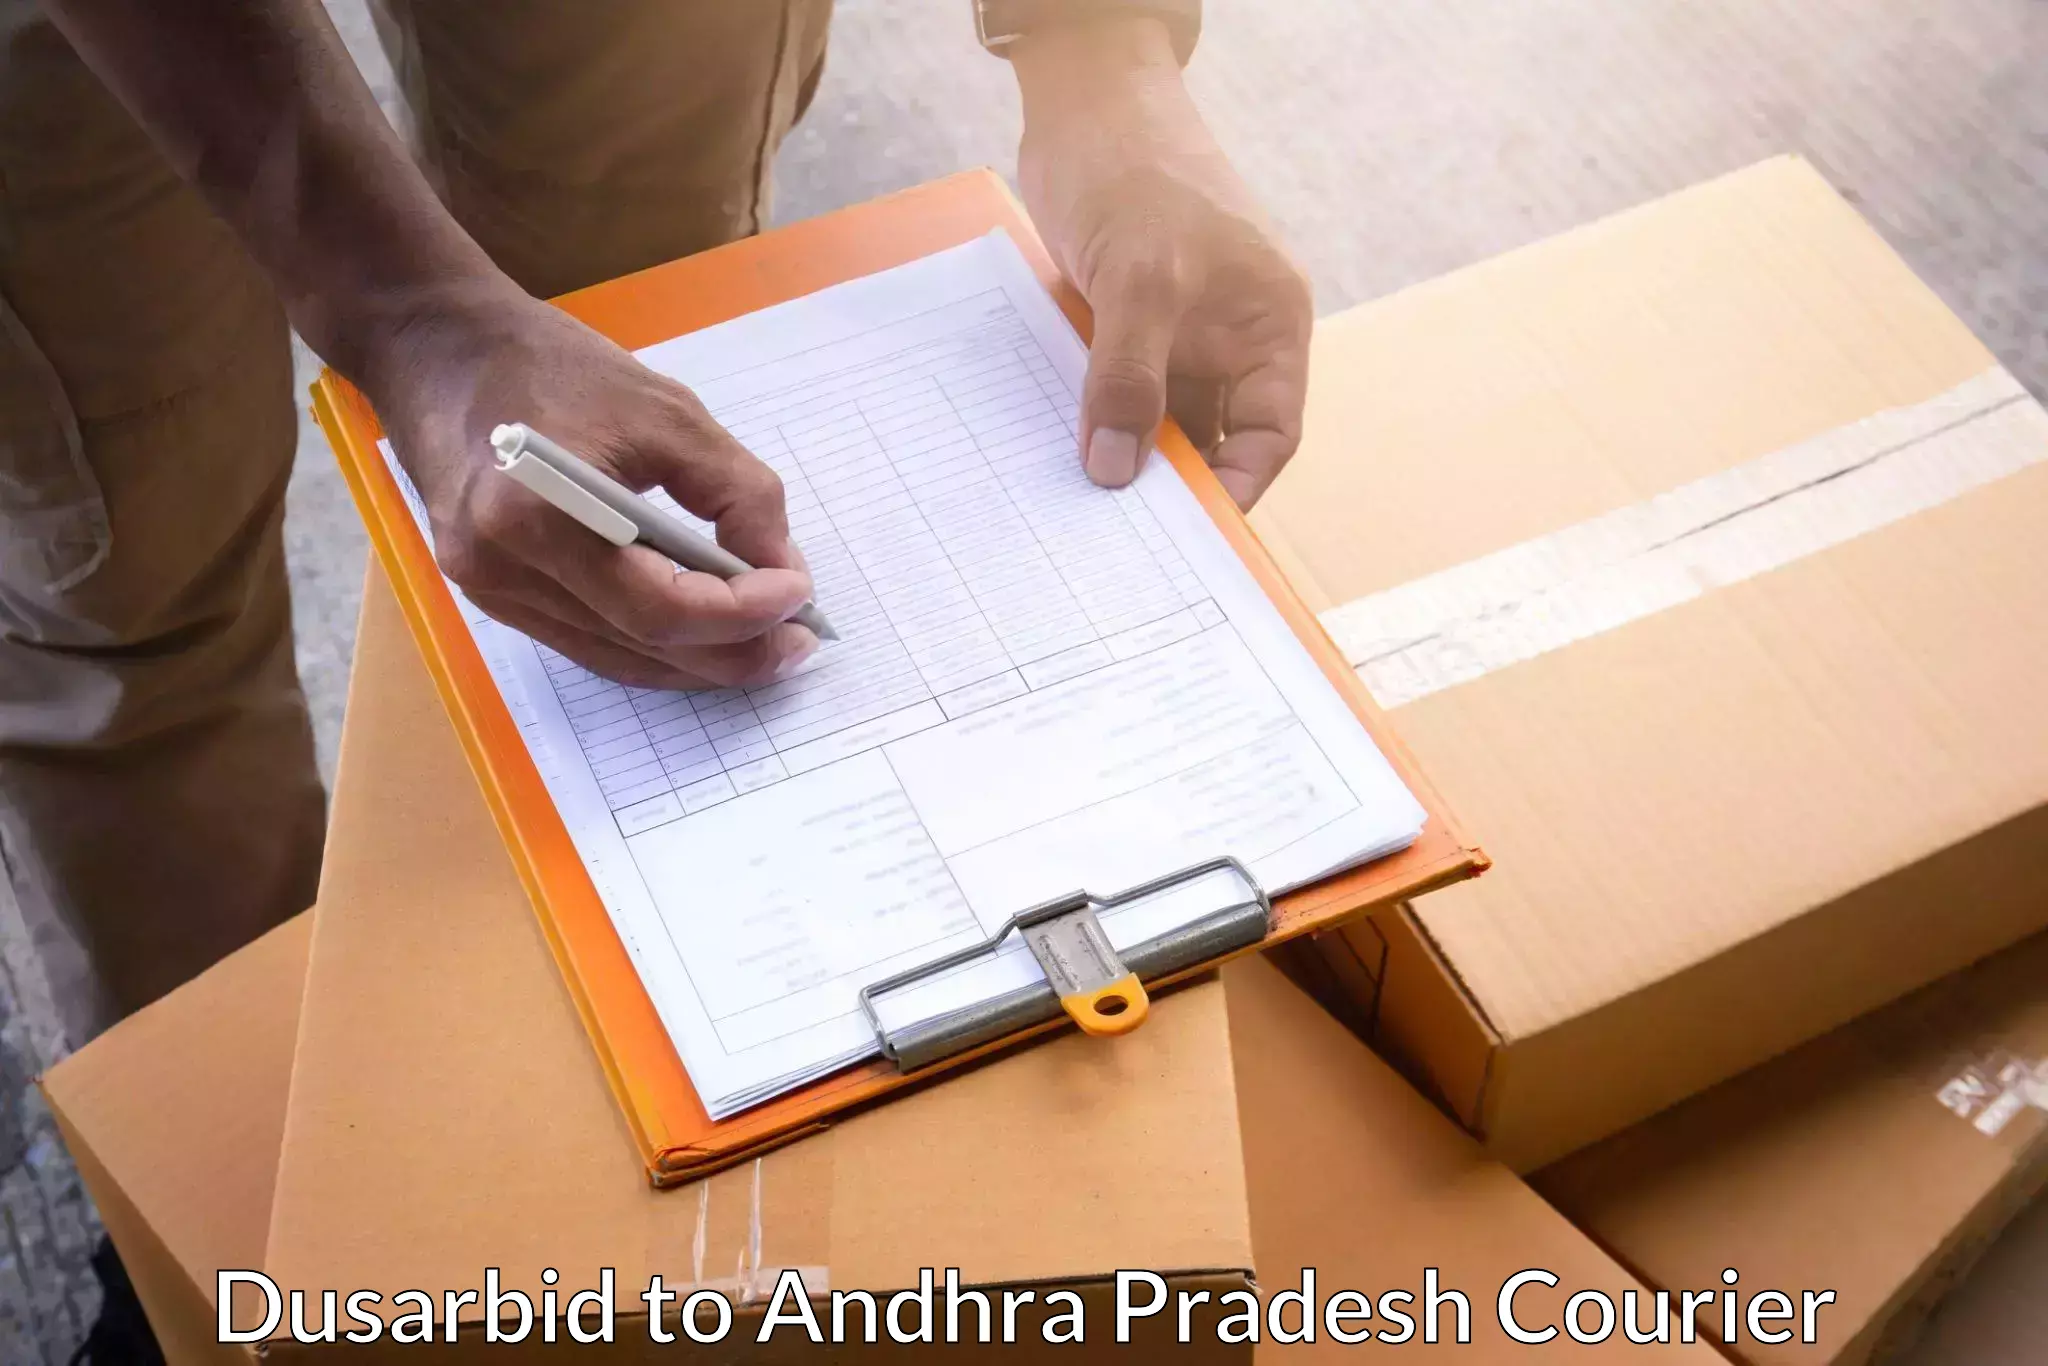 Parcel service for businesses Dusarbid to Srisailam